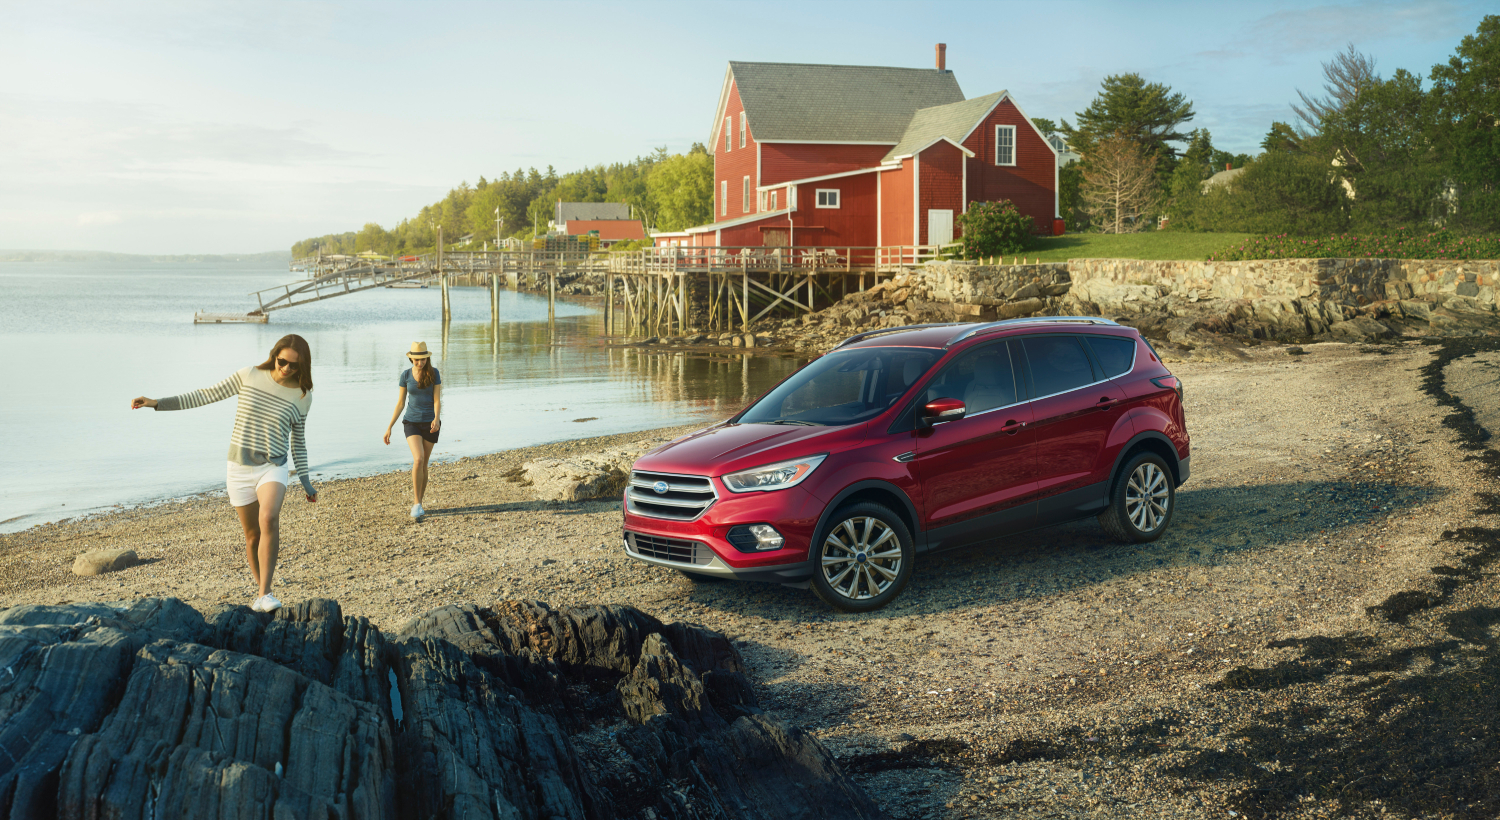 The best used Ford Escape SUV years like this one in red